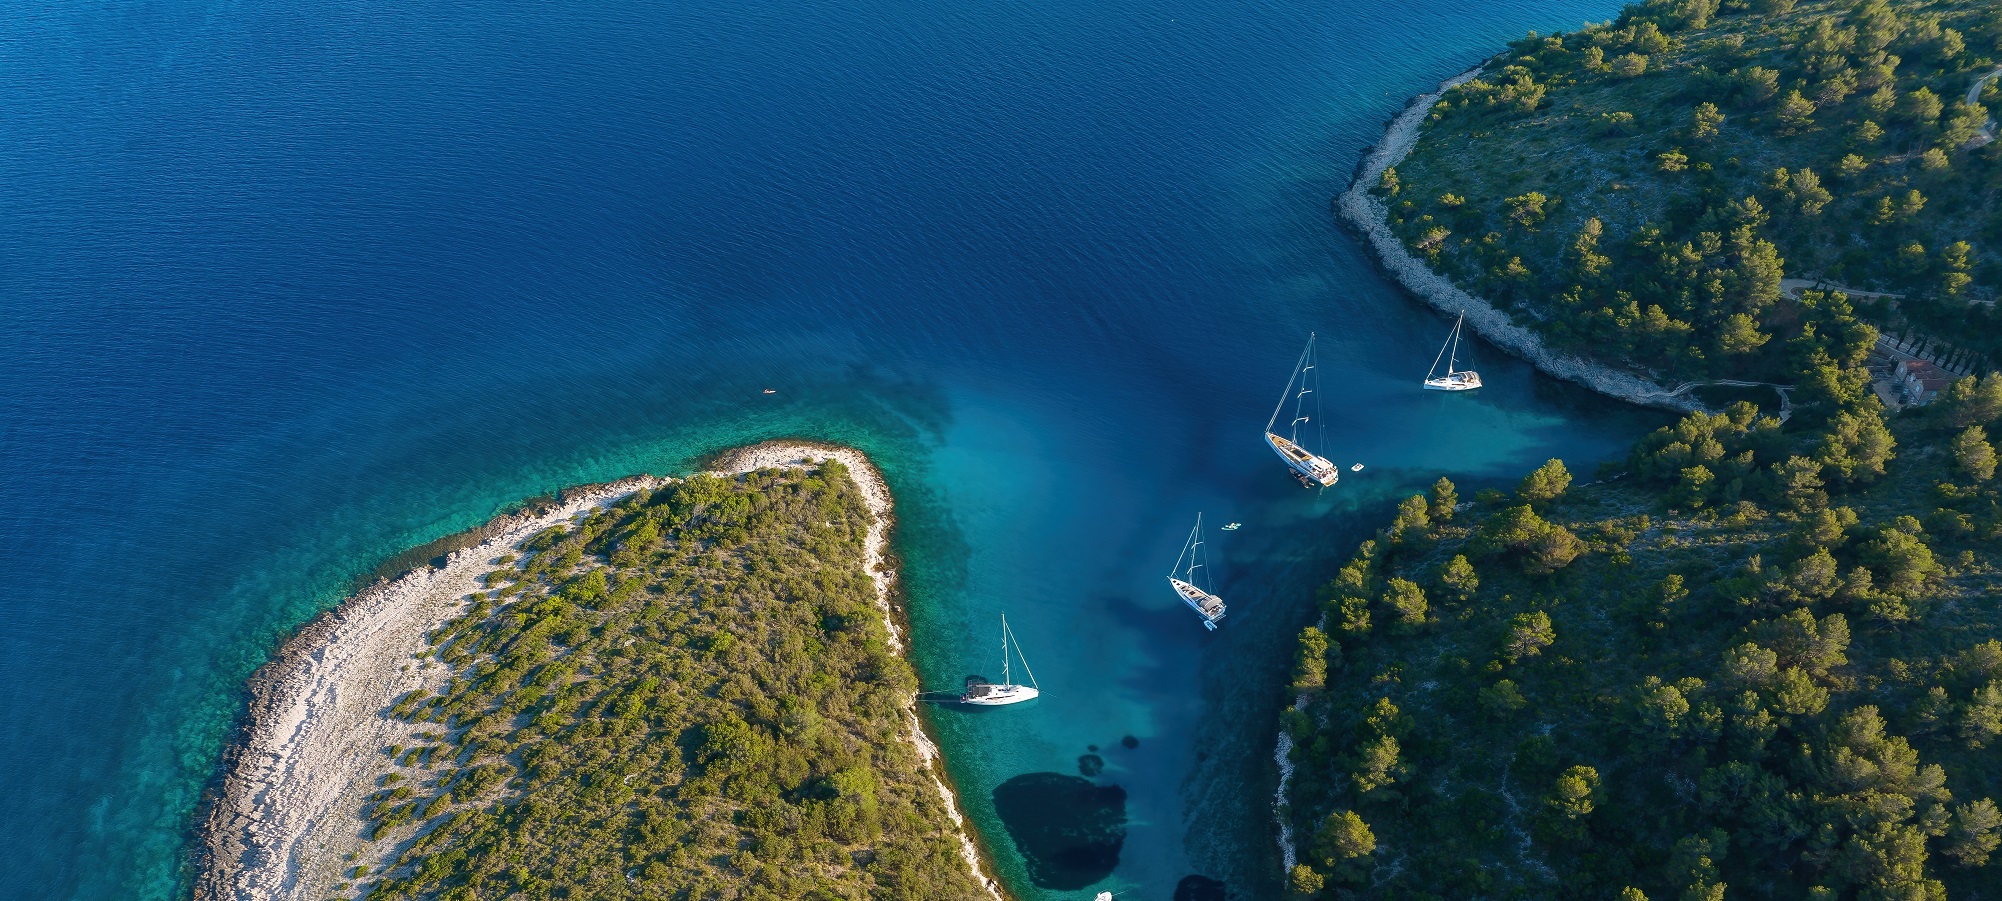 How Early Should I Book a Yacht Charter?